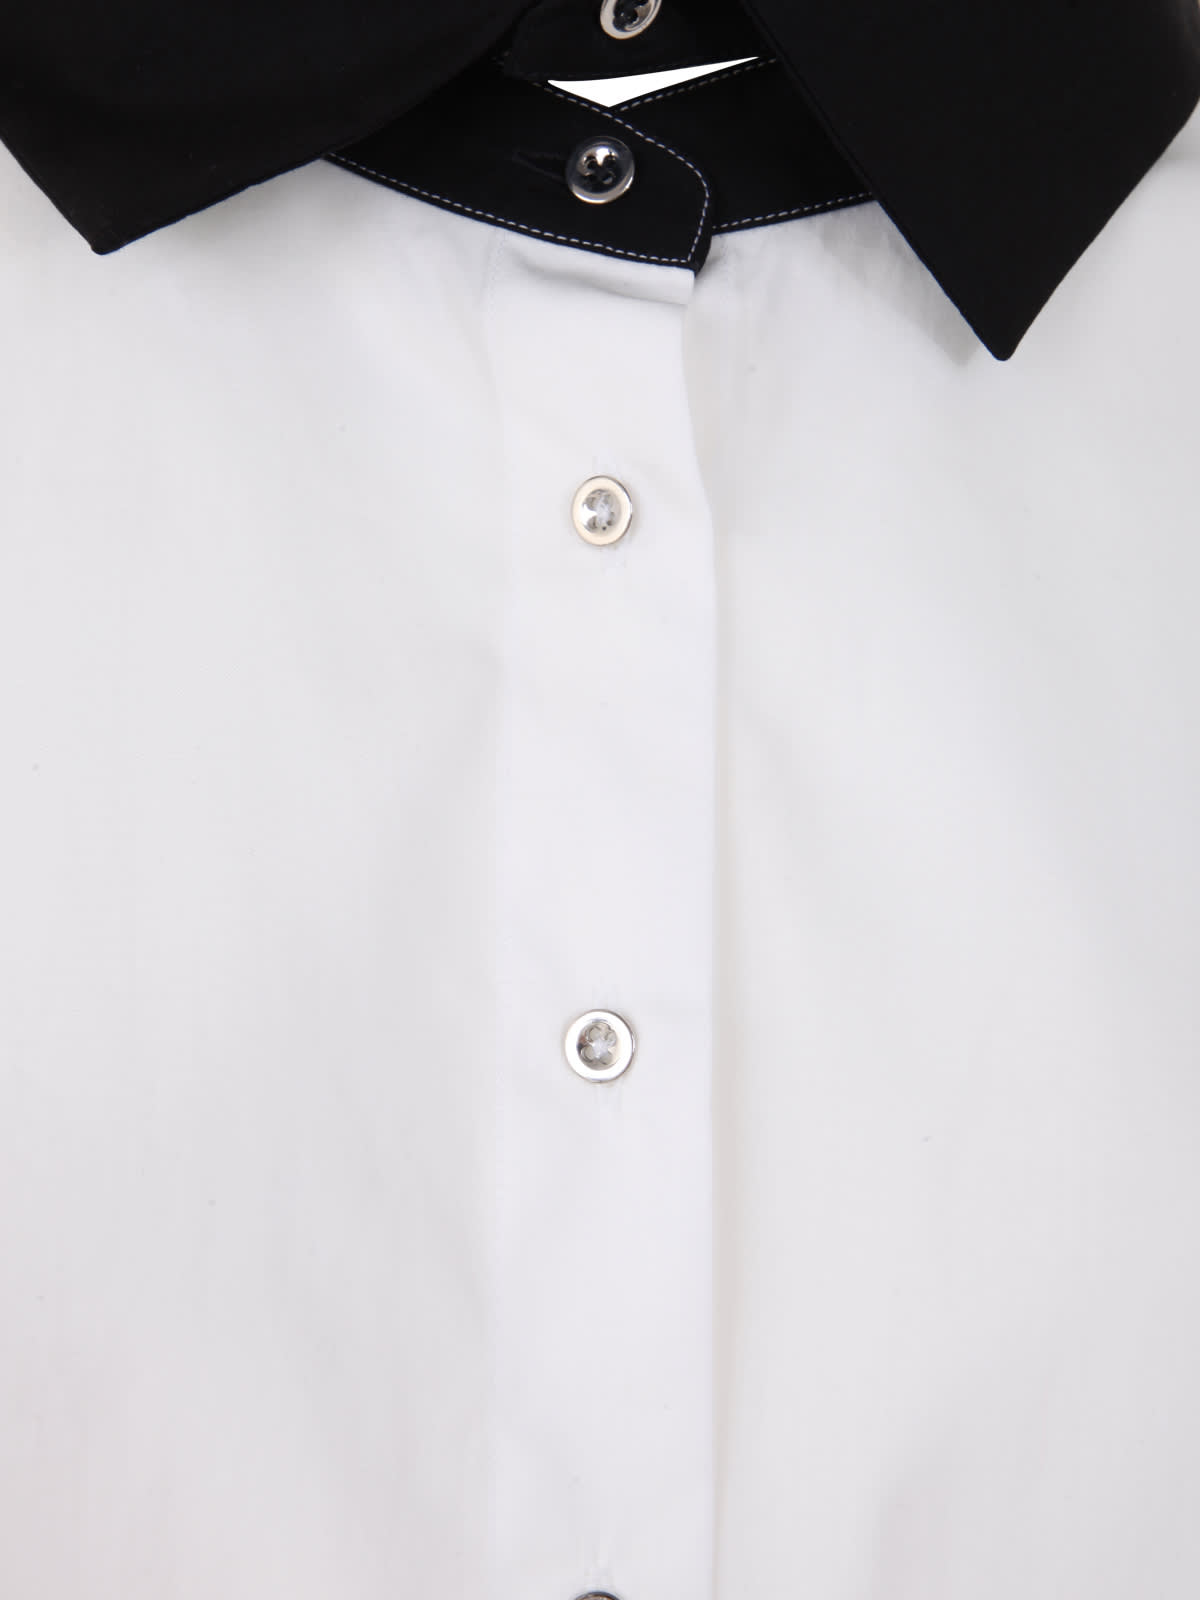 Shop Marques' Almeida Shirt With Detachable Cuffs And Collar In Black/white